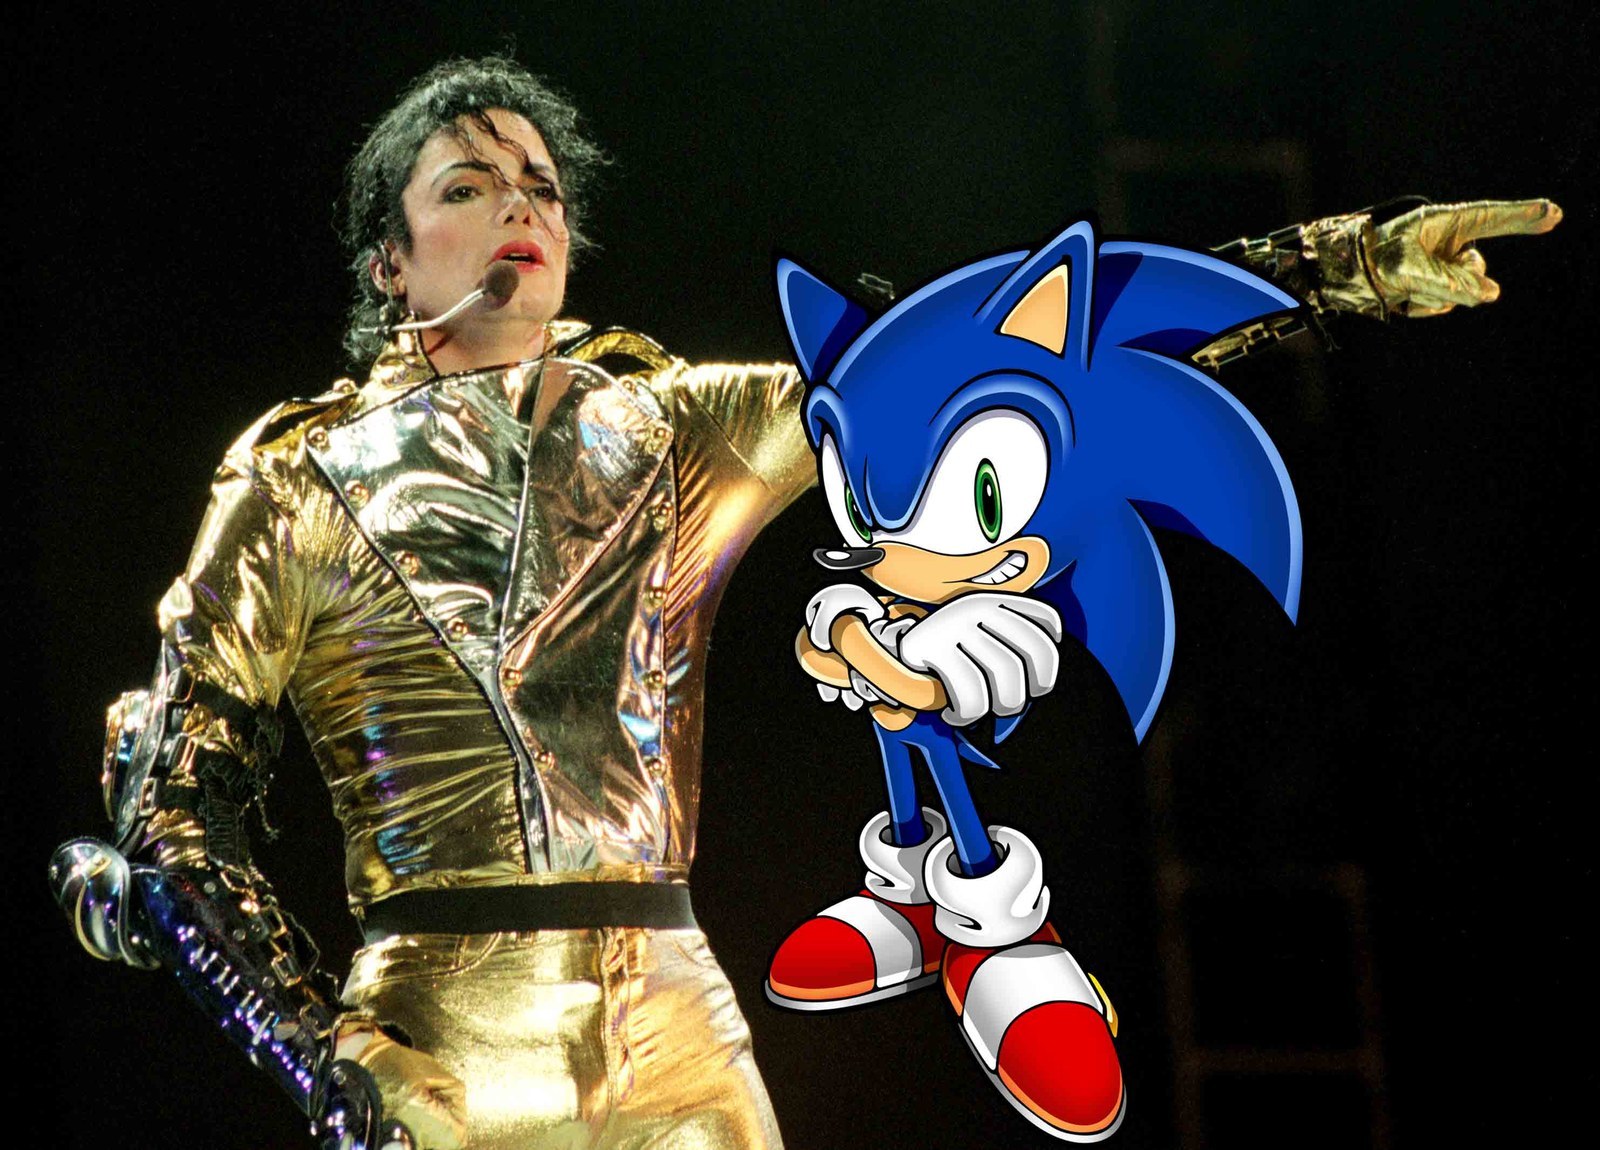 Michael Jackson probably composed the music for Sonic the Hedgehog